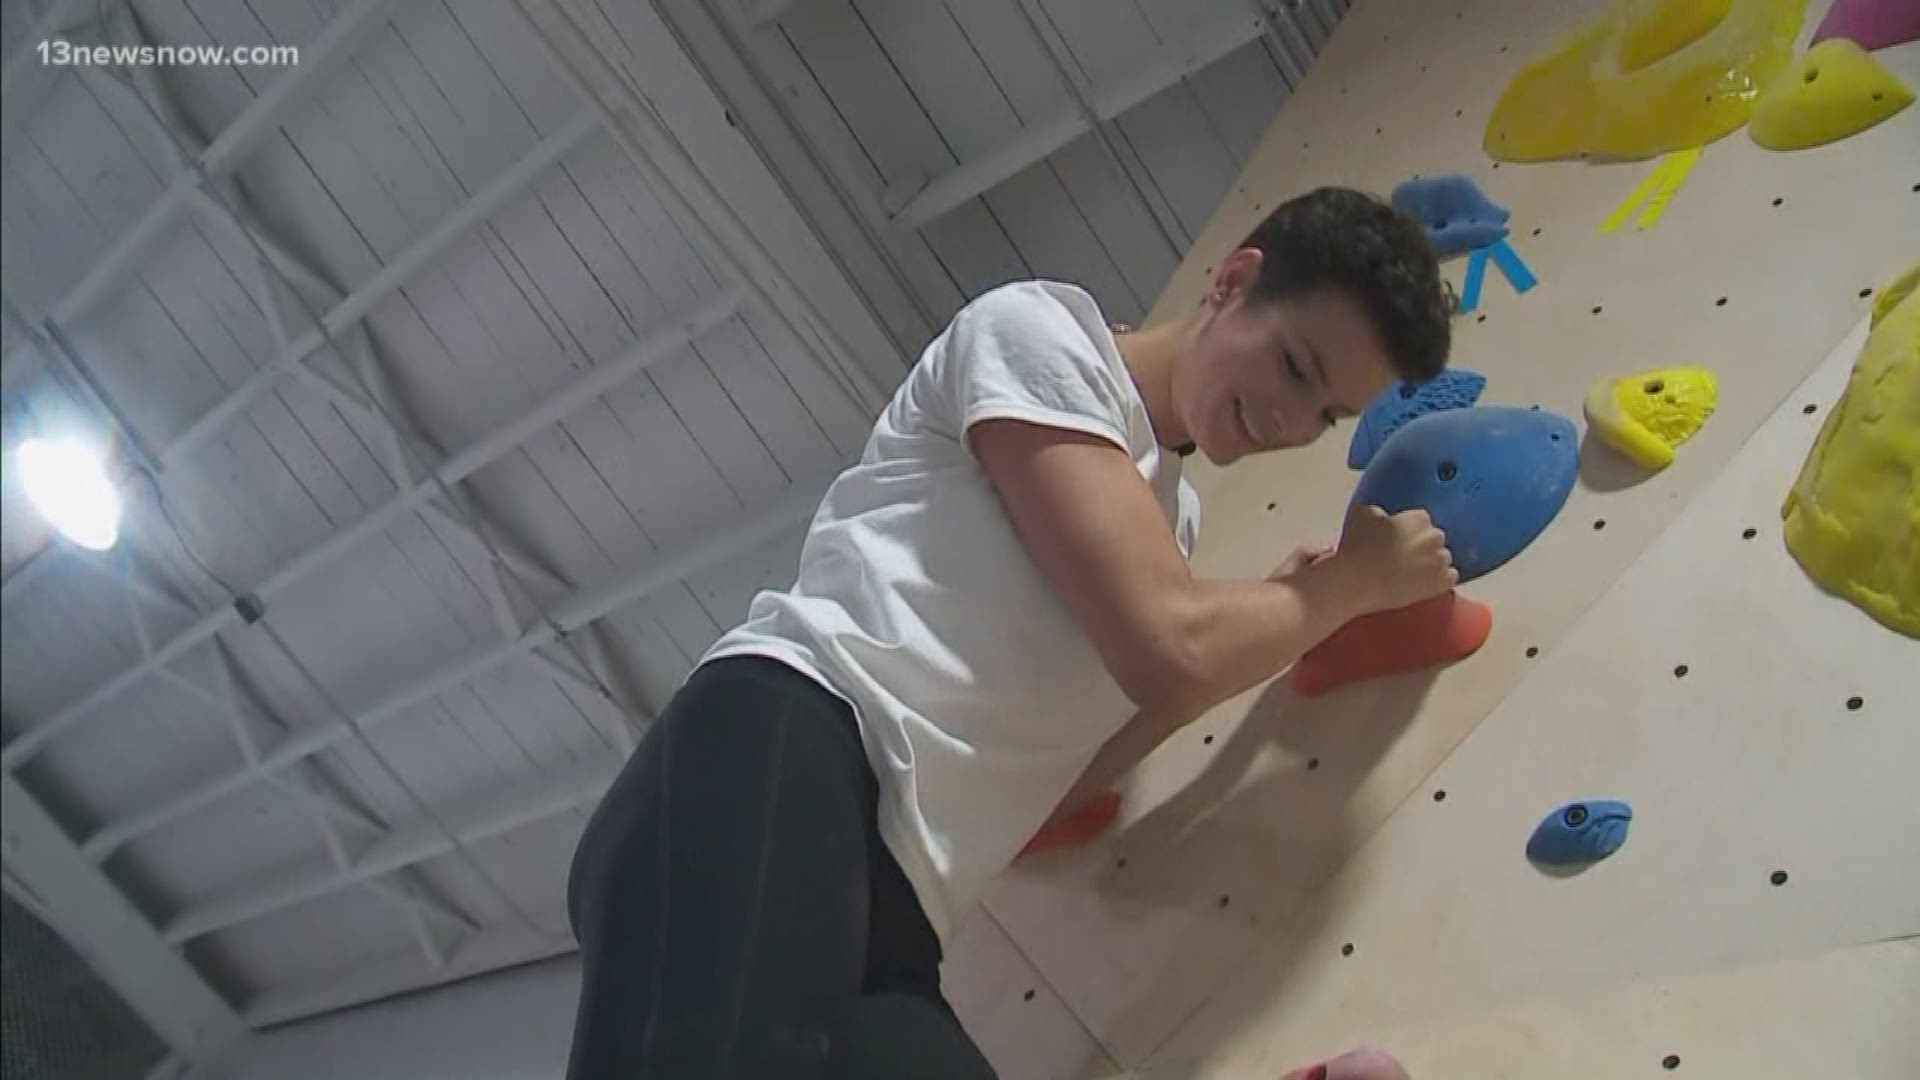 'Latitude Climbing' is a brand new indoor rock-climbing gym that opened in Norfolk.